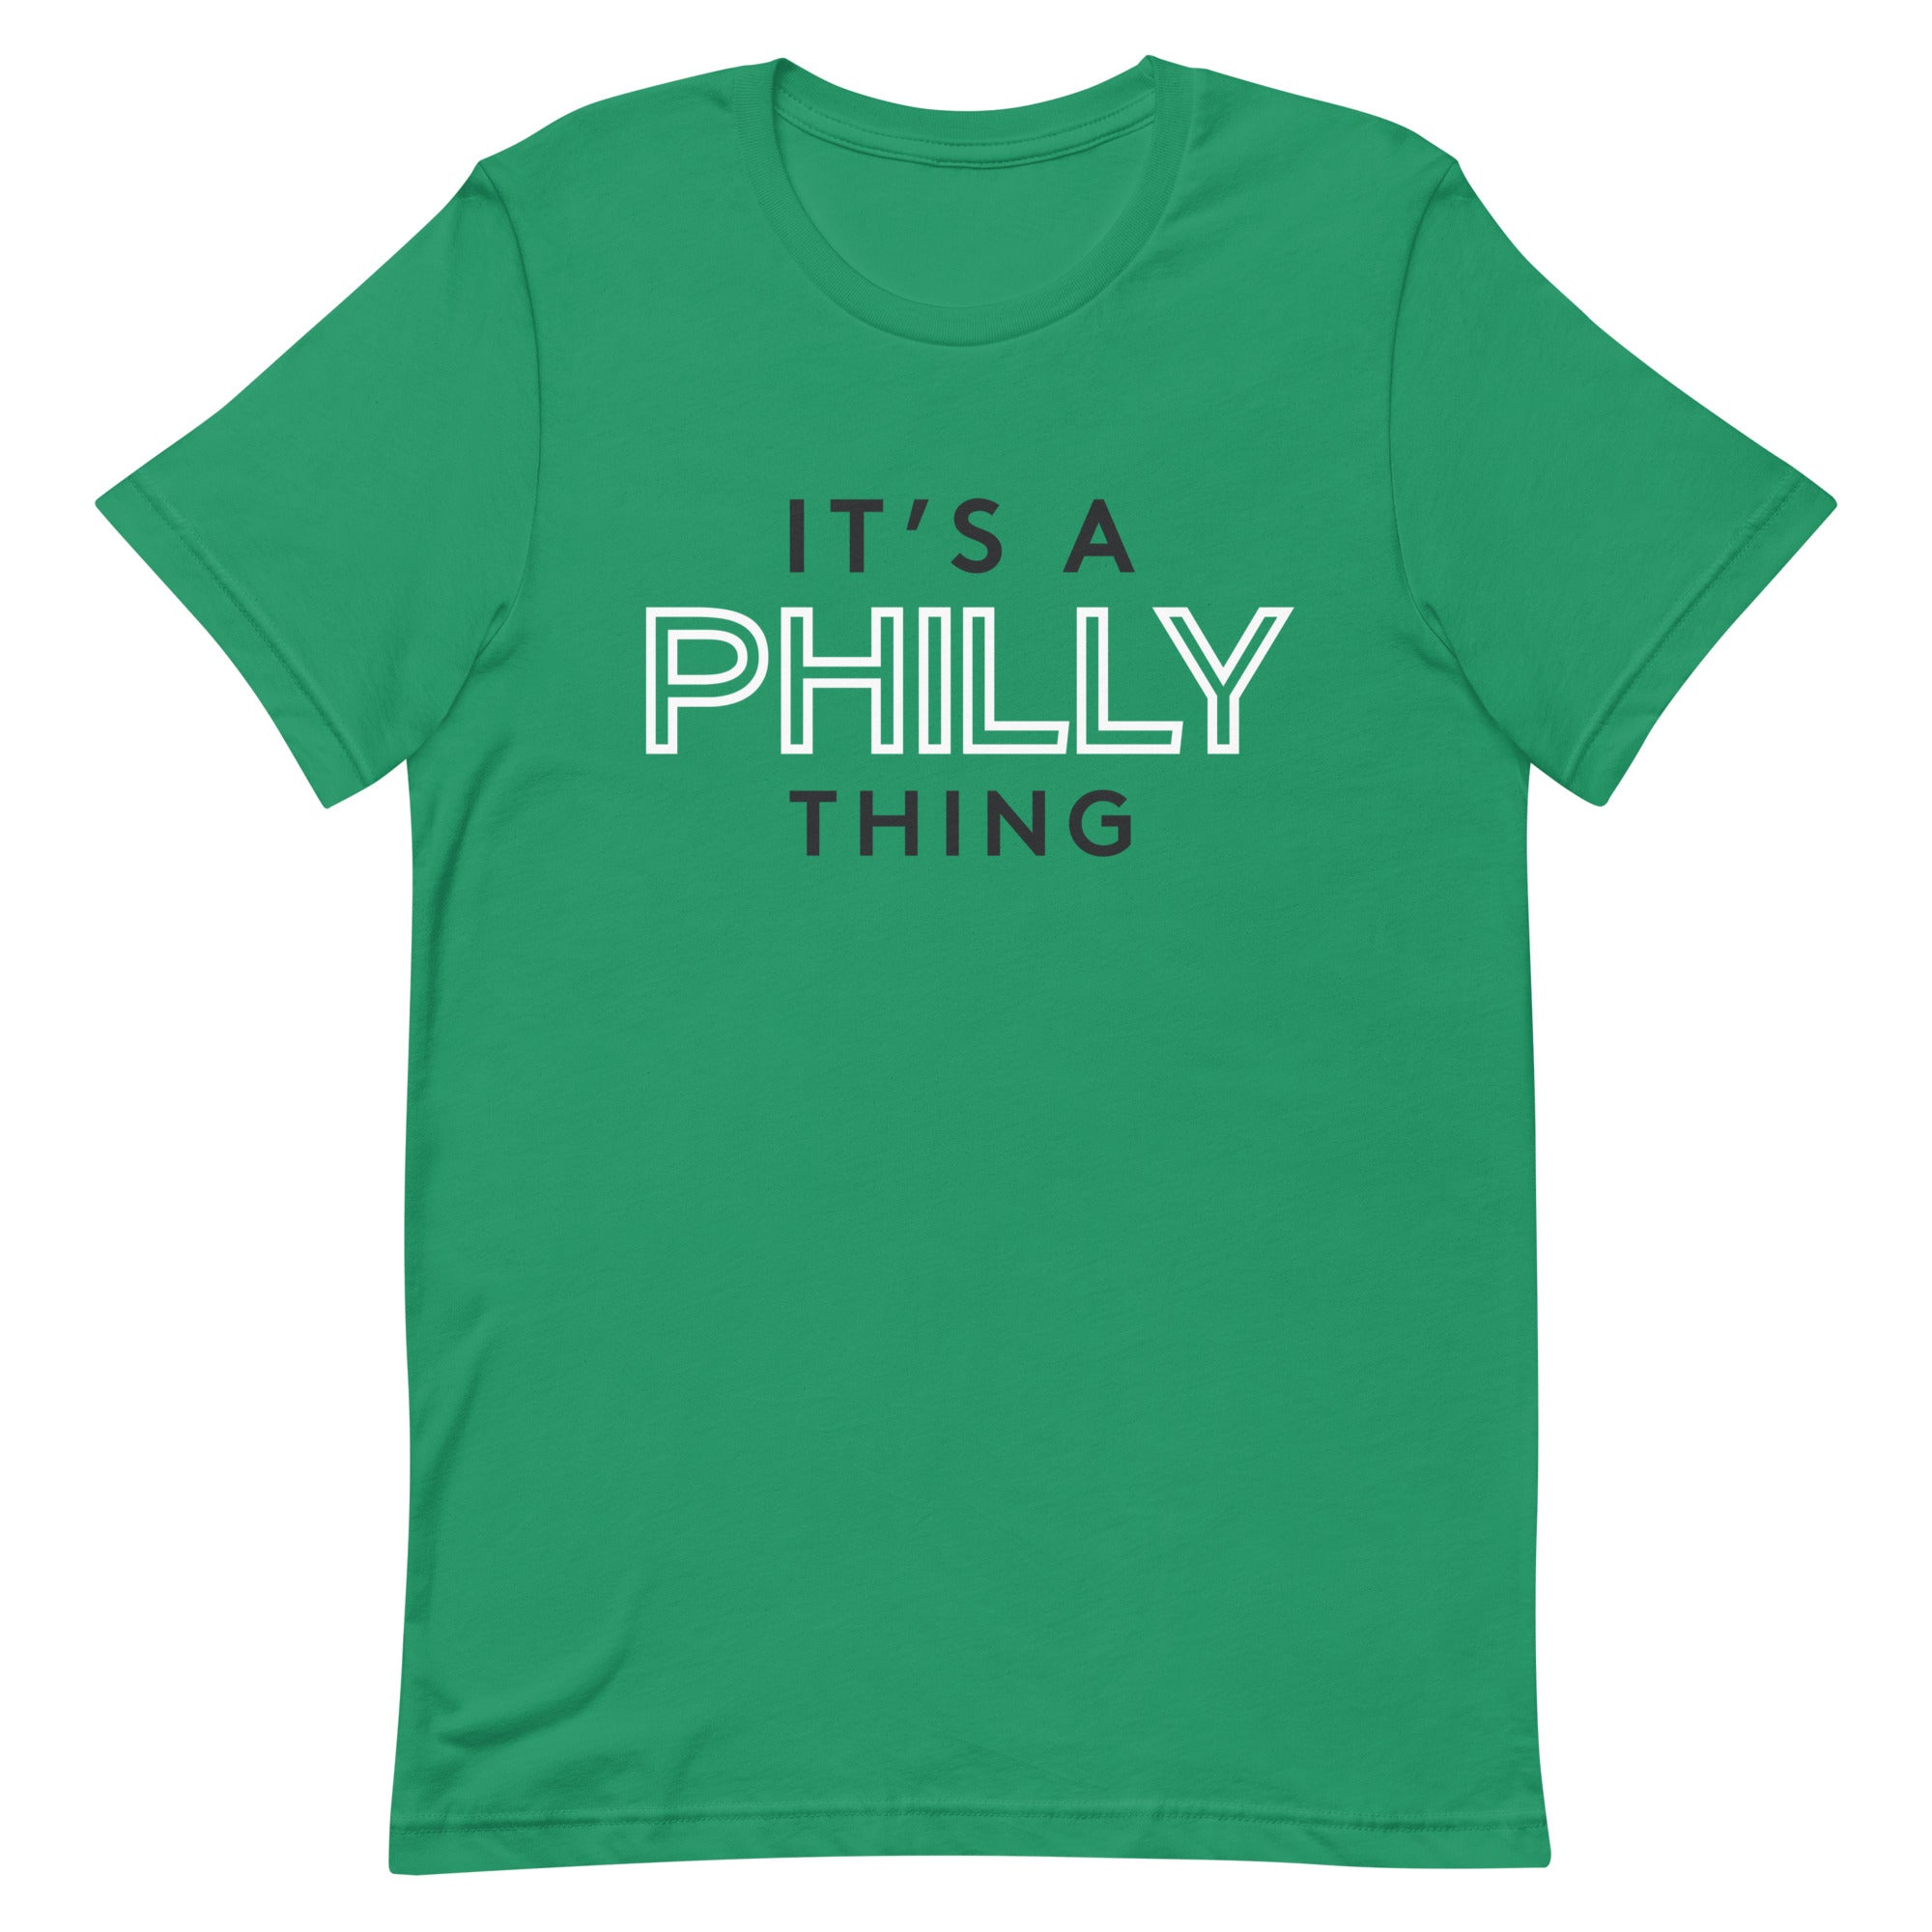 South Street Threads It's A Philly Thing Shirt Green / XL